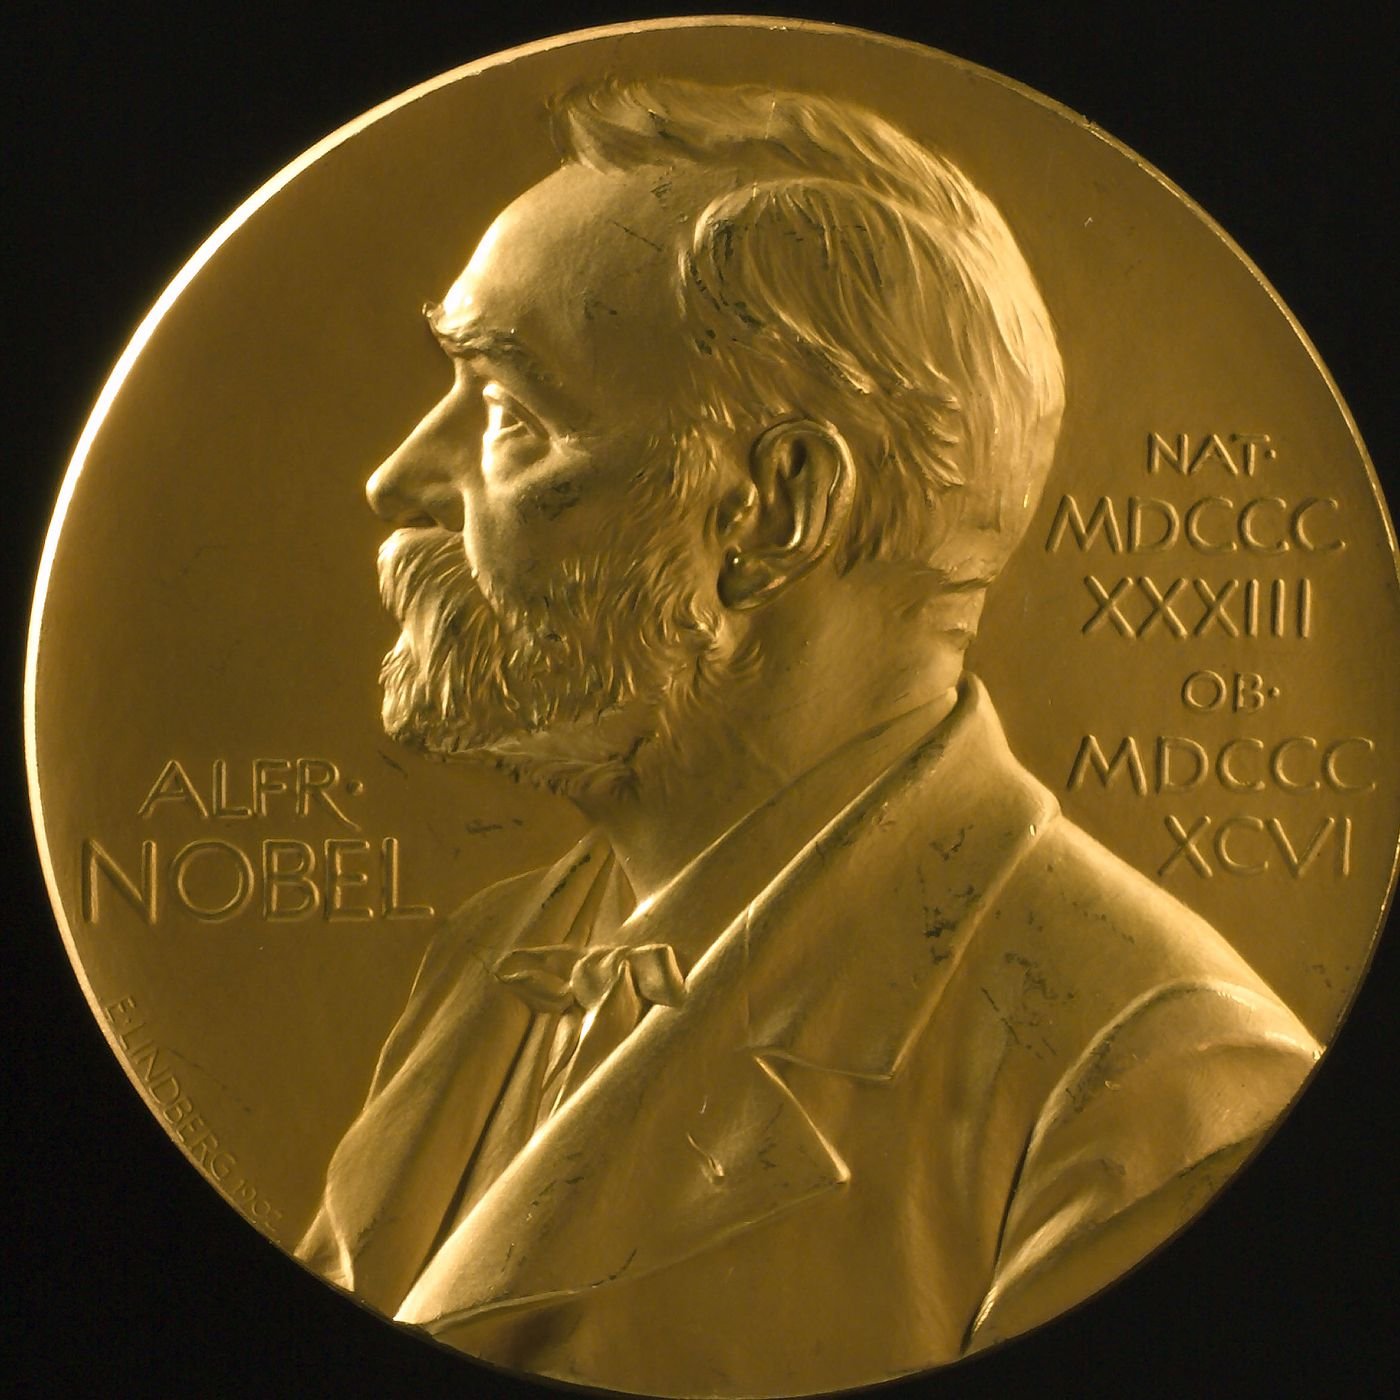 Nobel Prize winners From India